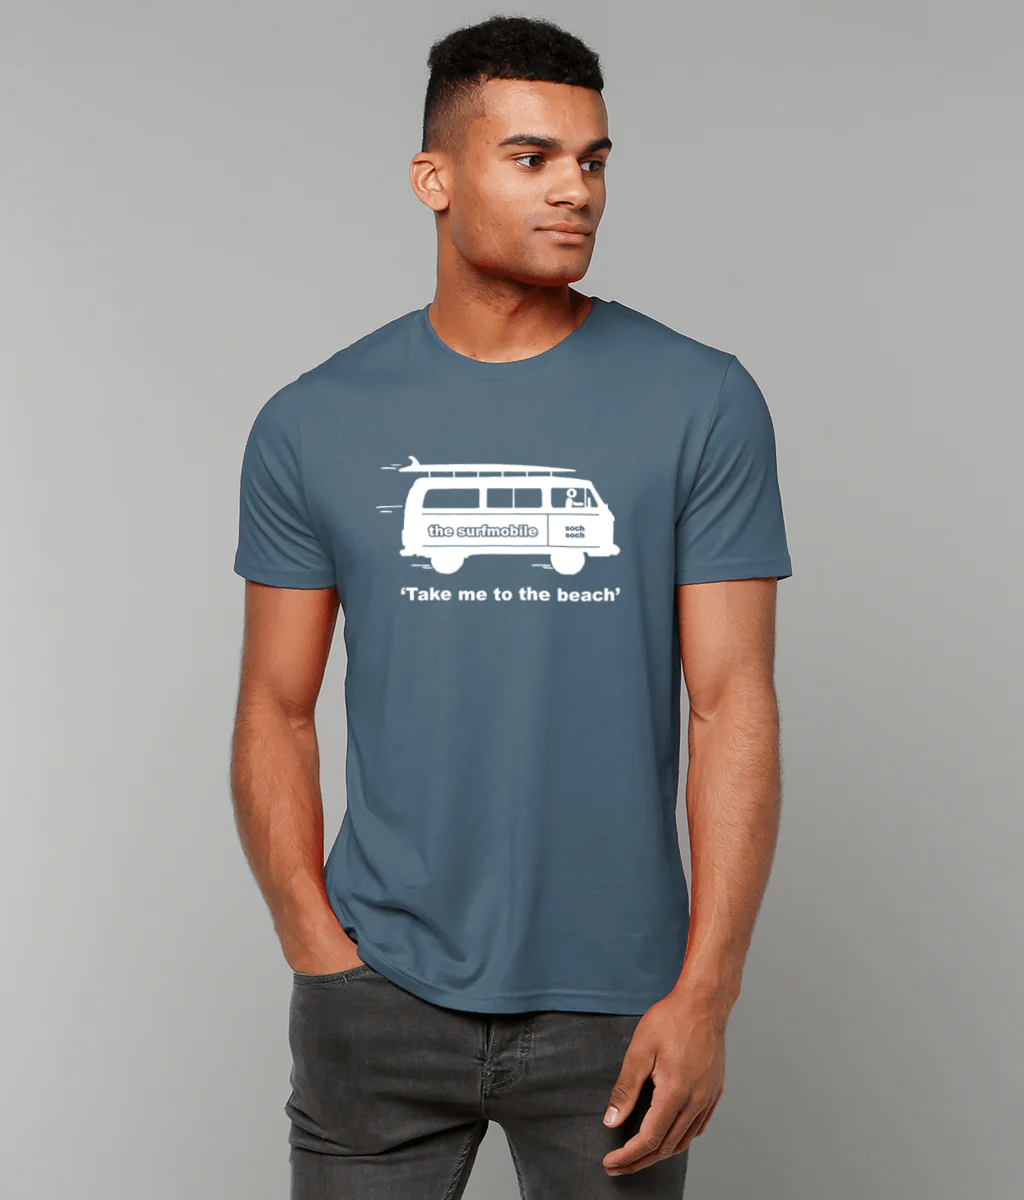 affordable organic outdoorsy t-shirts